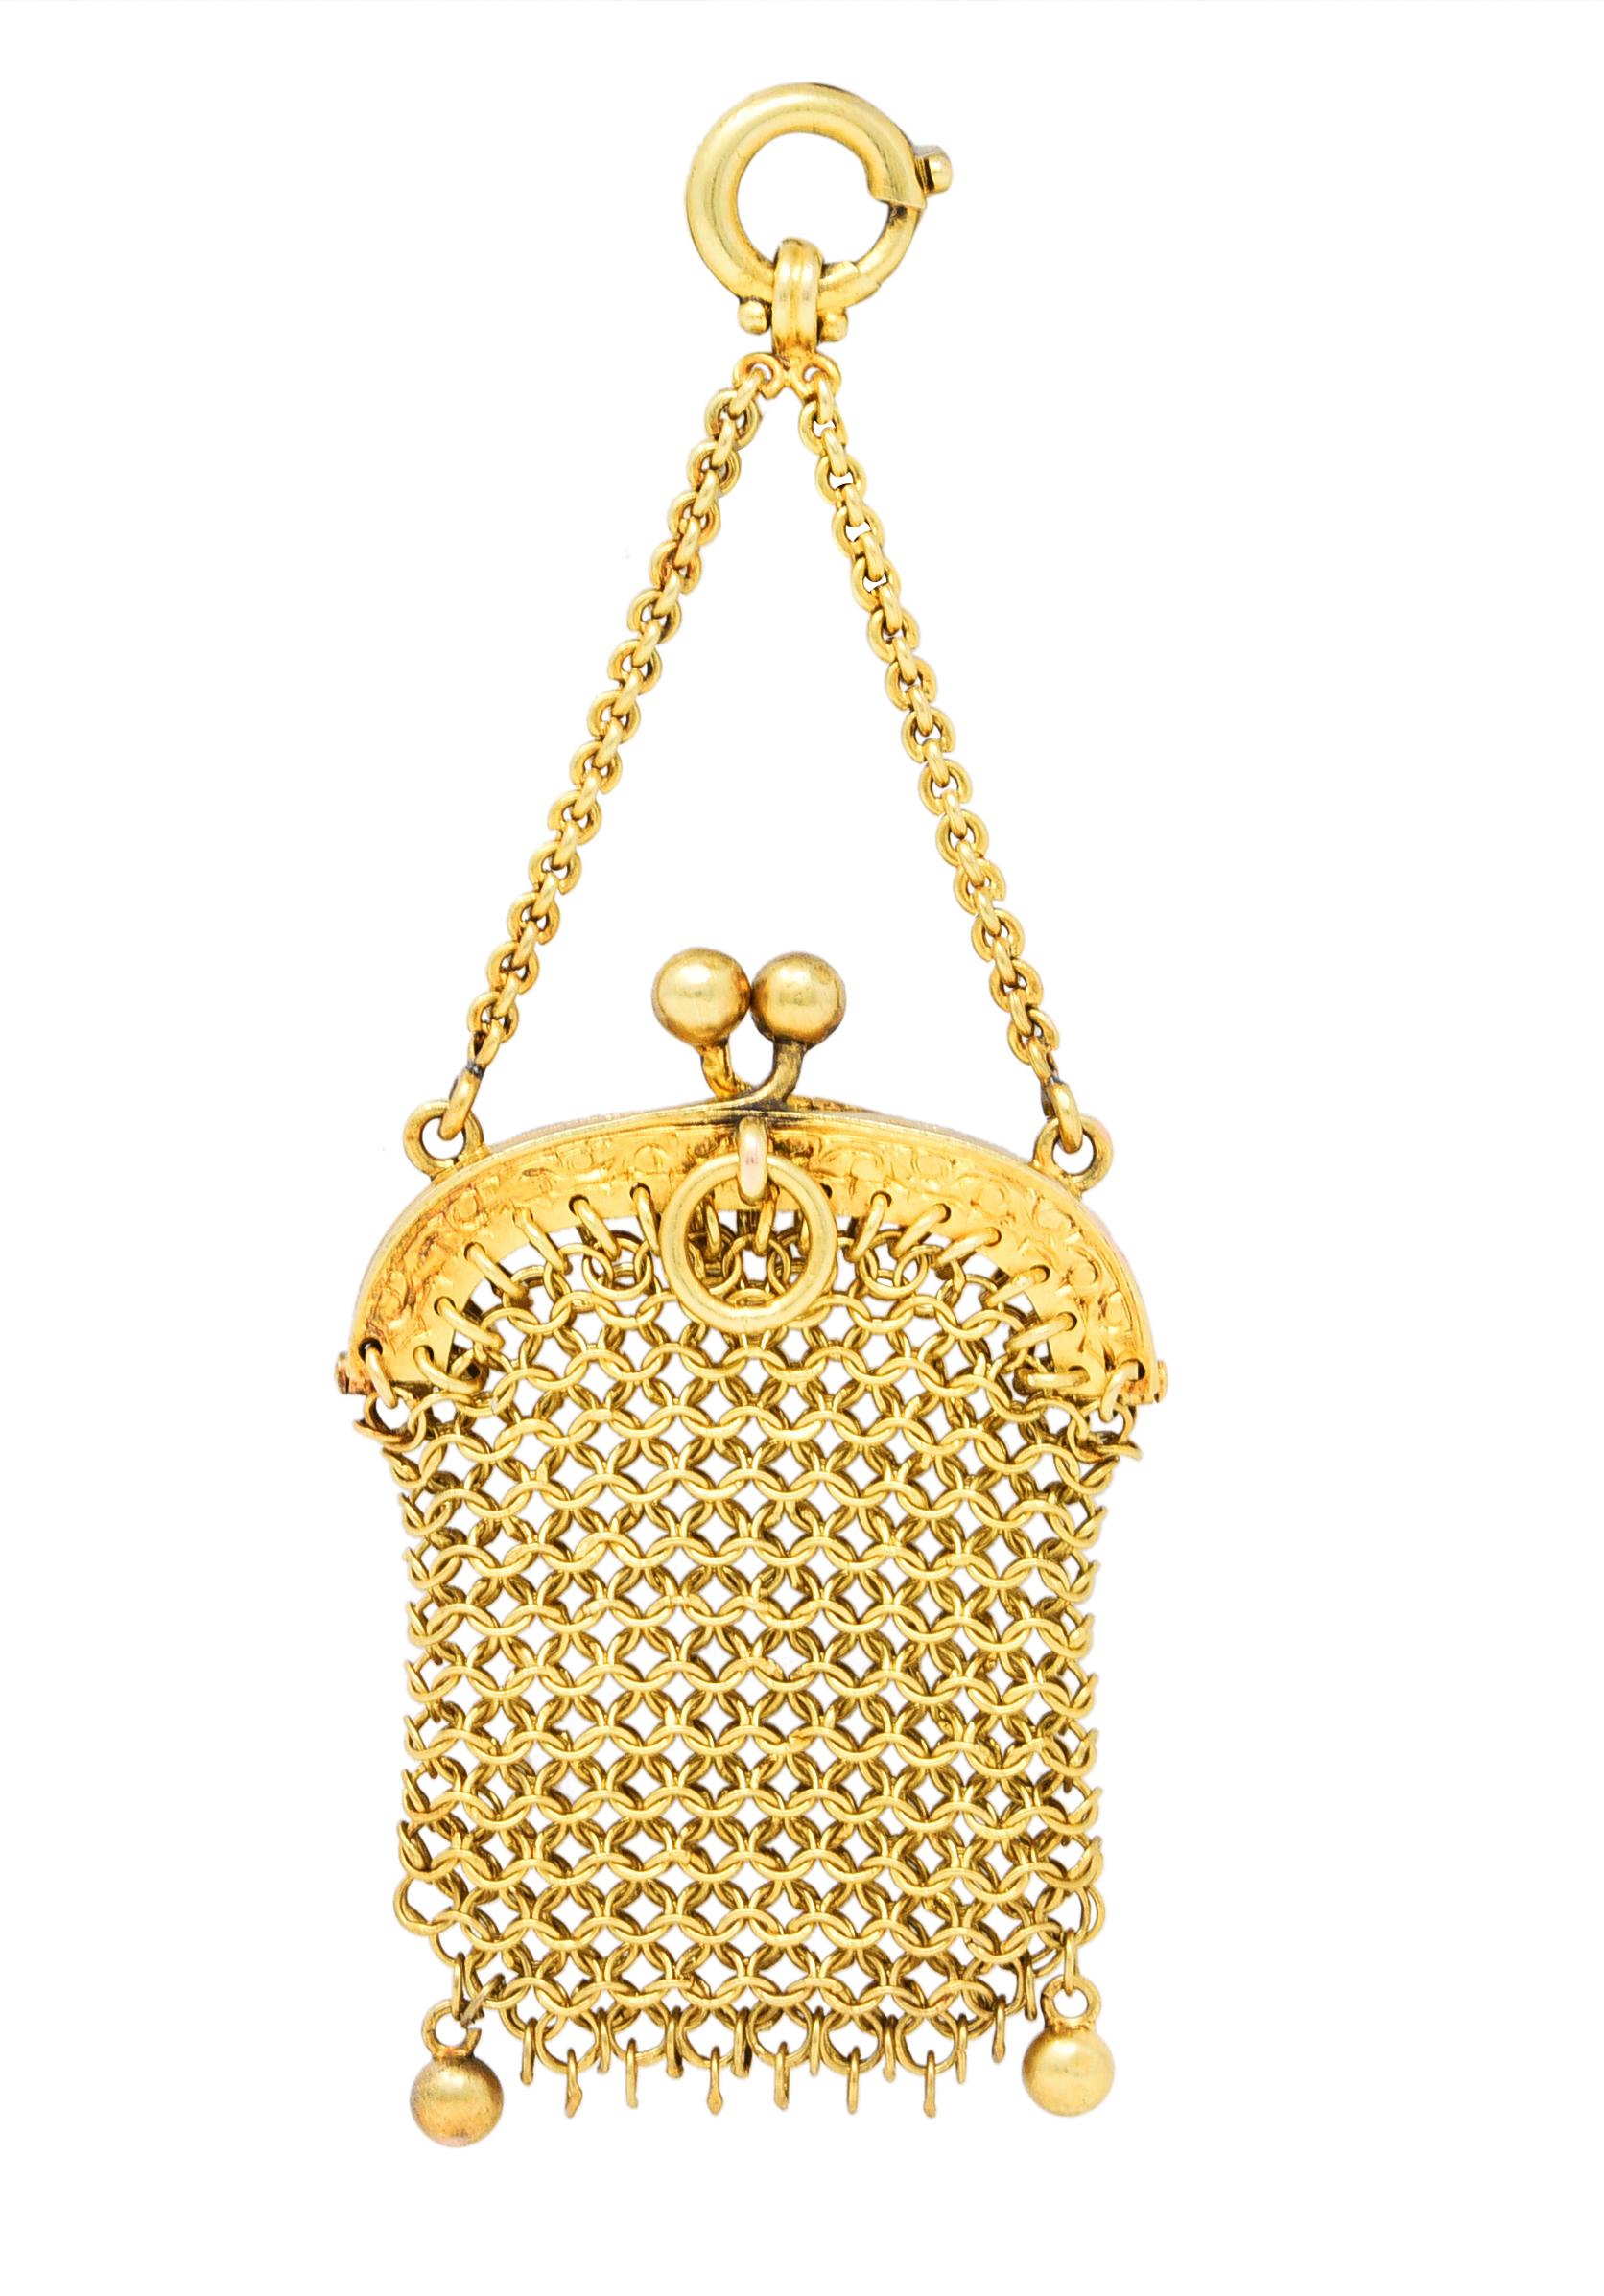 Designed as a miniature chatelaine purse comprised of a finely interwoven gold chain mail

Opens on a hinge via bypass clasp that is hand-engraved with scrollwork

Suspending from swagged chain and terminates as a spring ring clasp

With maker's